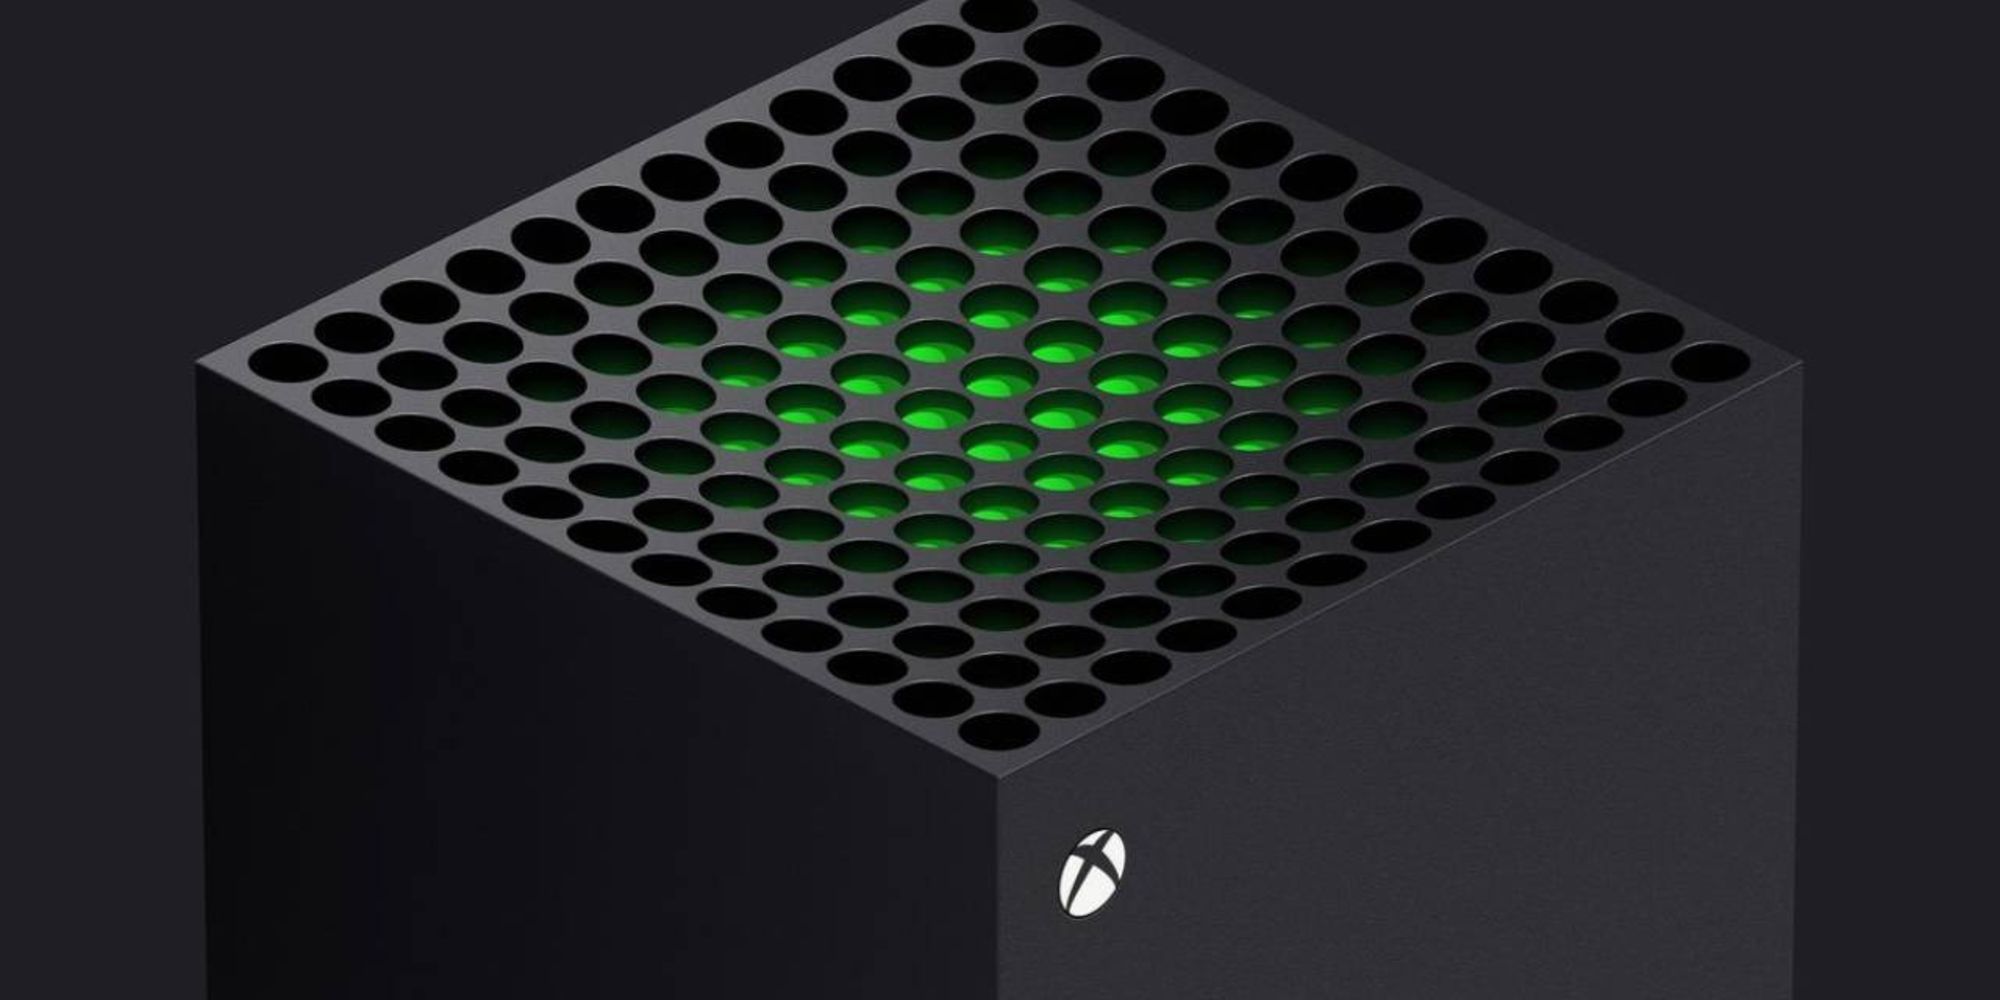 Shot Of The Top Of Xbox Series X